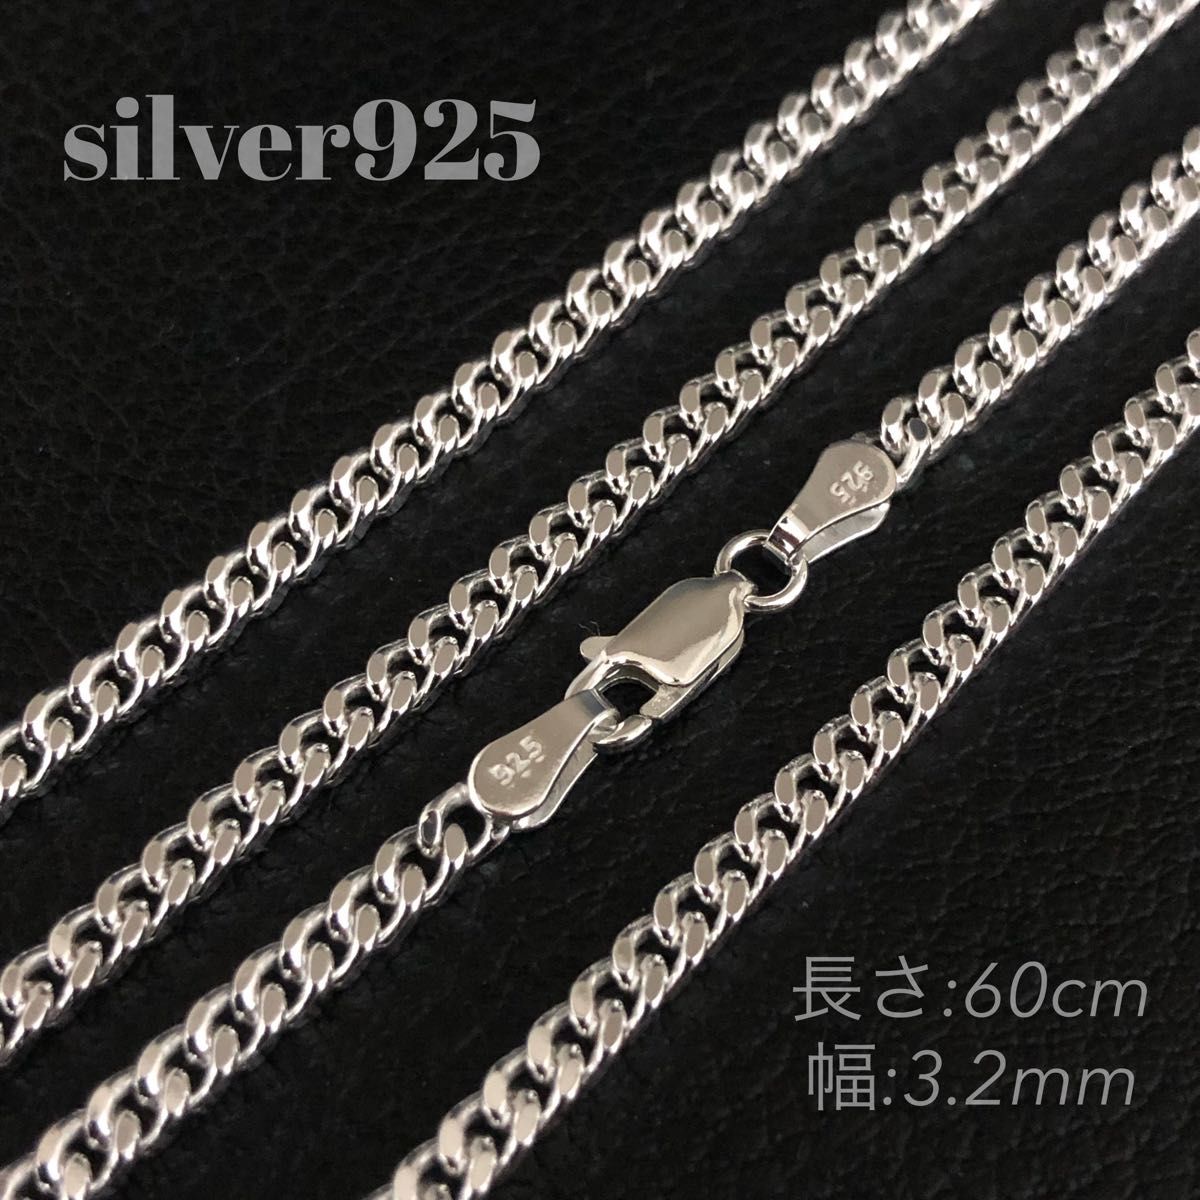 SILVER925 HEAVY WEIGHT CHAIN NECKLACE60/ ヘビーウエイト シルバー